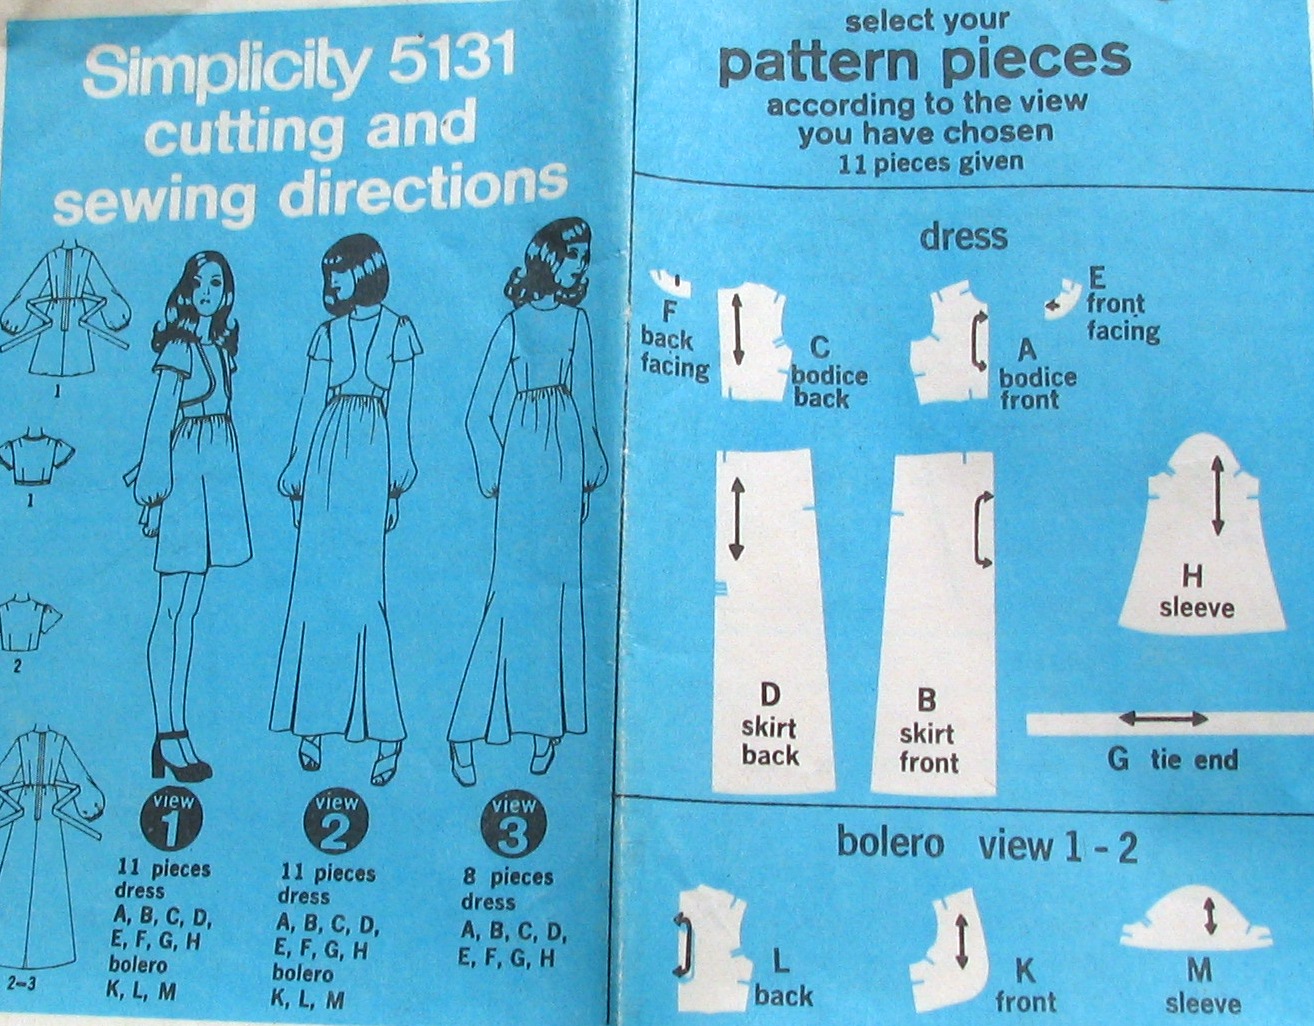 Free Sewing Patterns and Sewing Machine Help at AllCrafts!